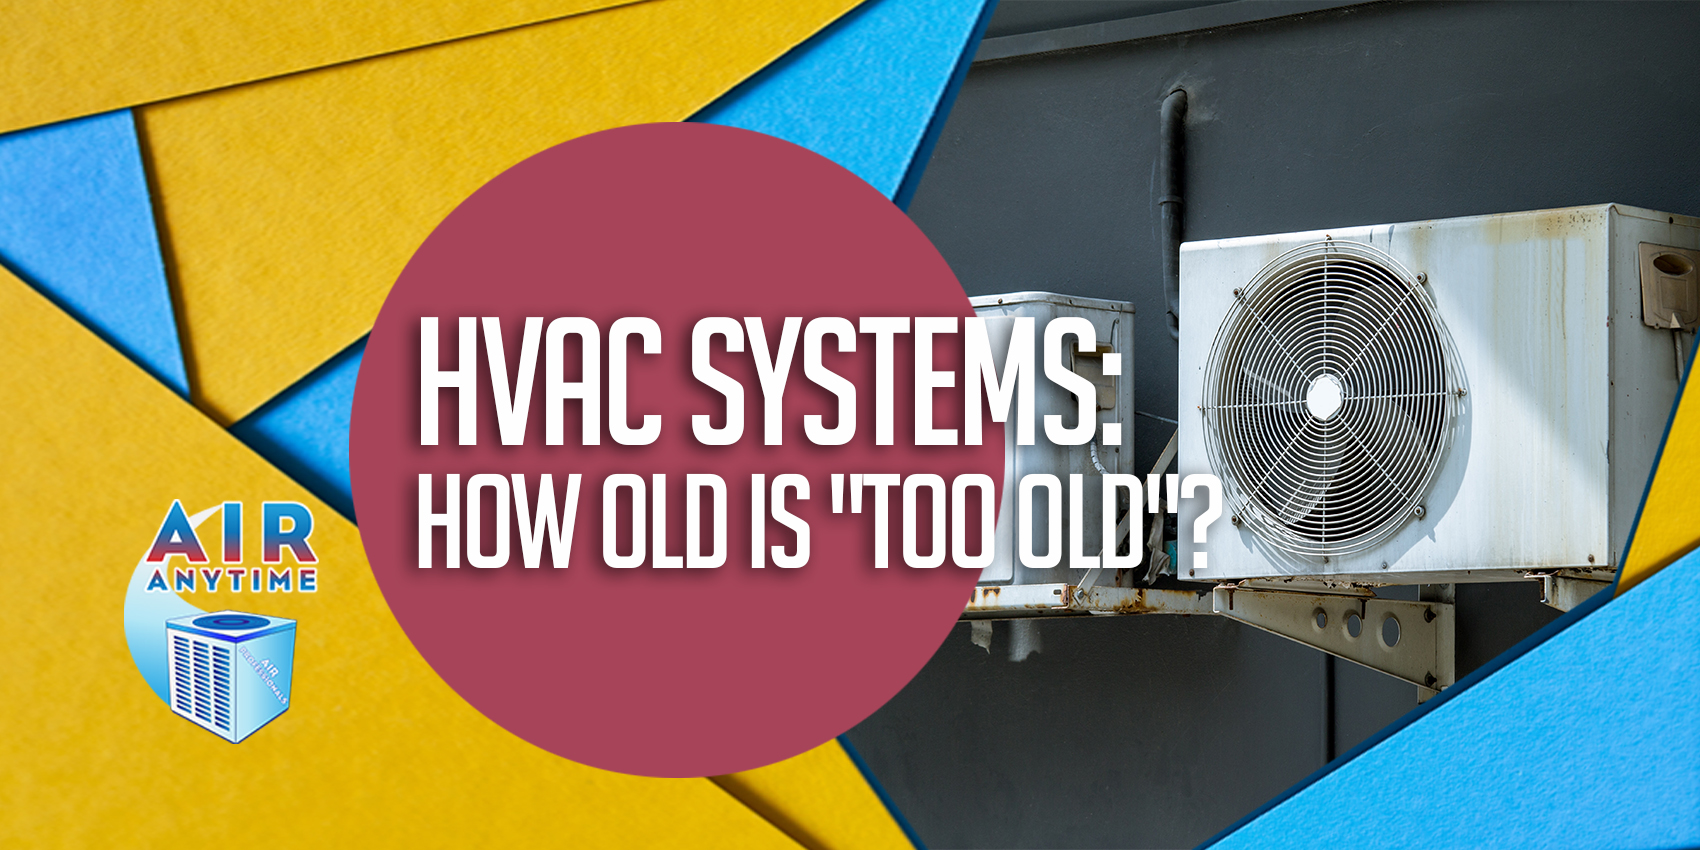 HVAC Systems: How Old is “Too Old”?